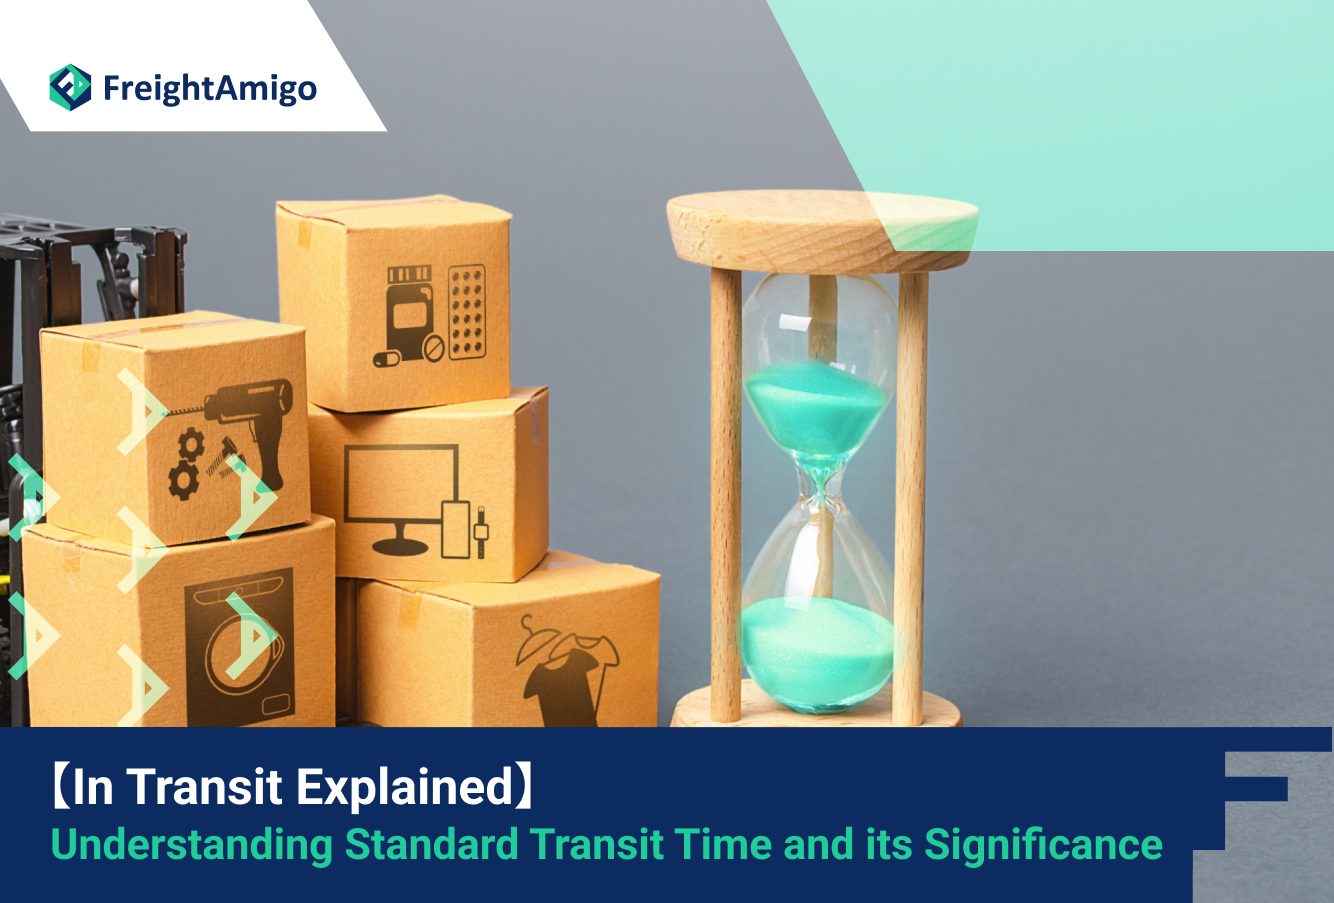 In Transit Explained: Understanding Standard Transit Time and its Significance